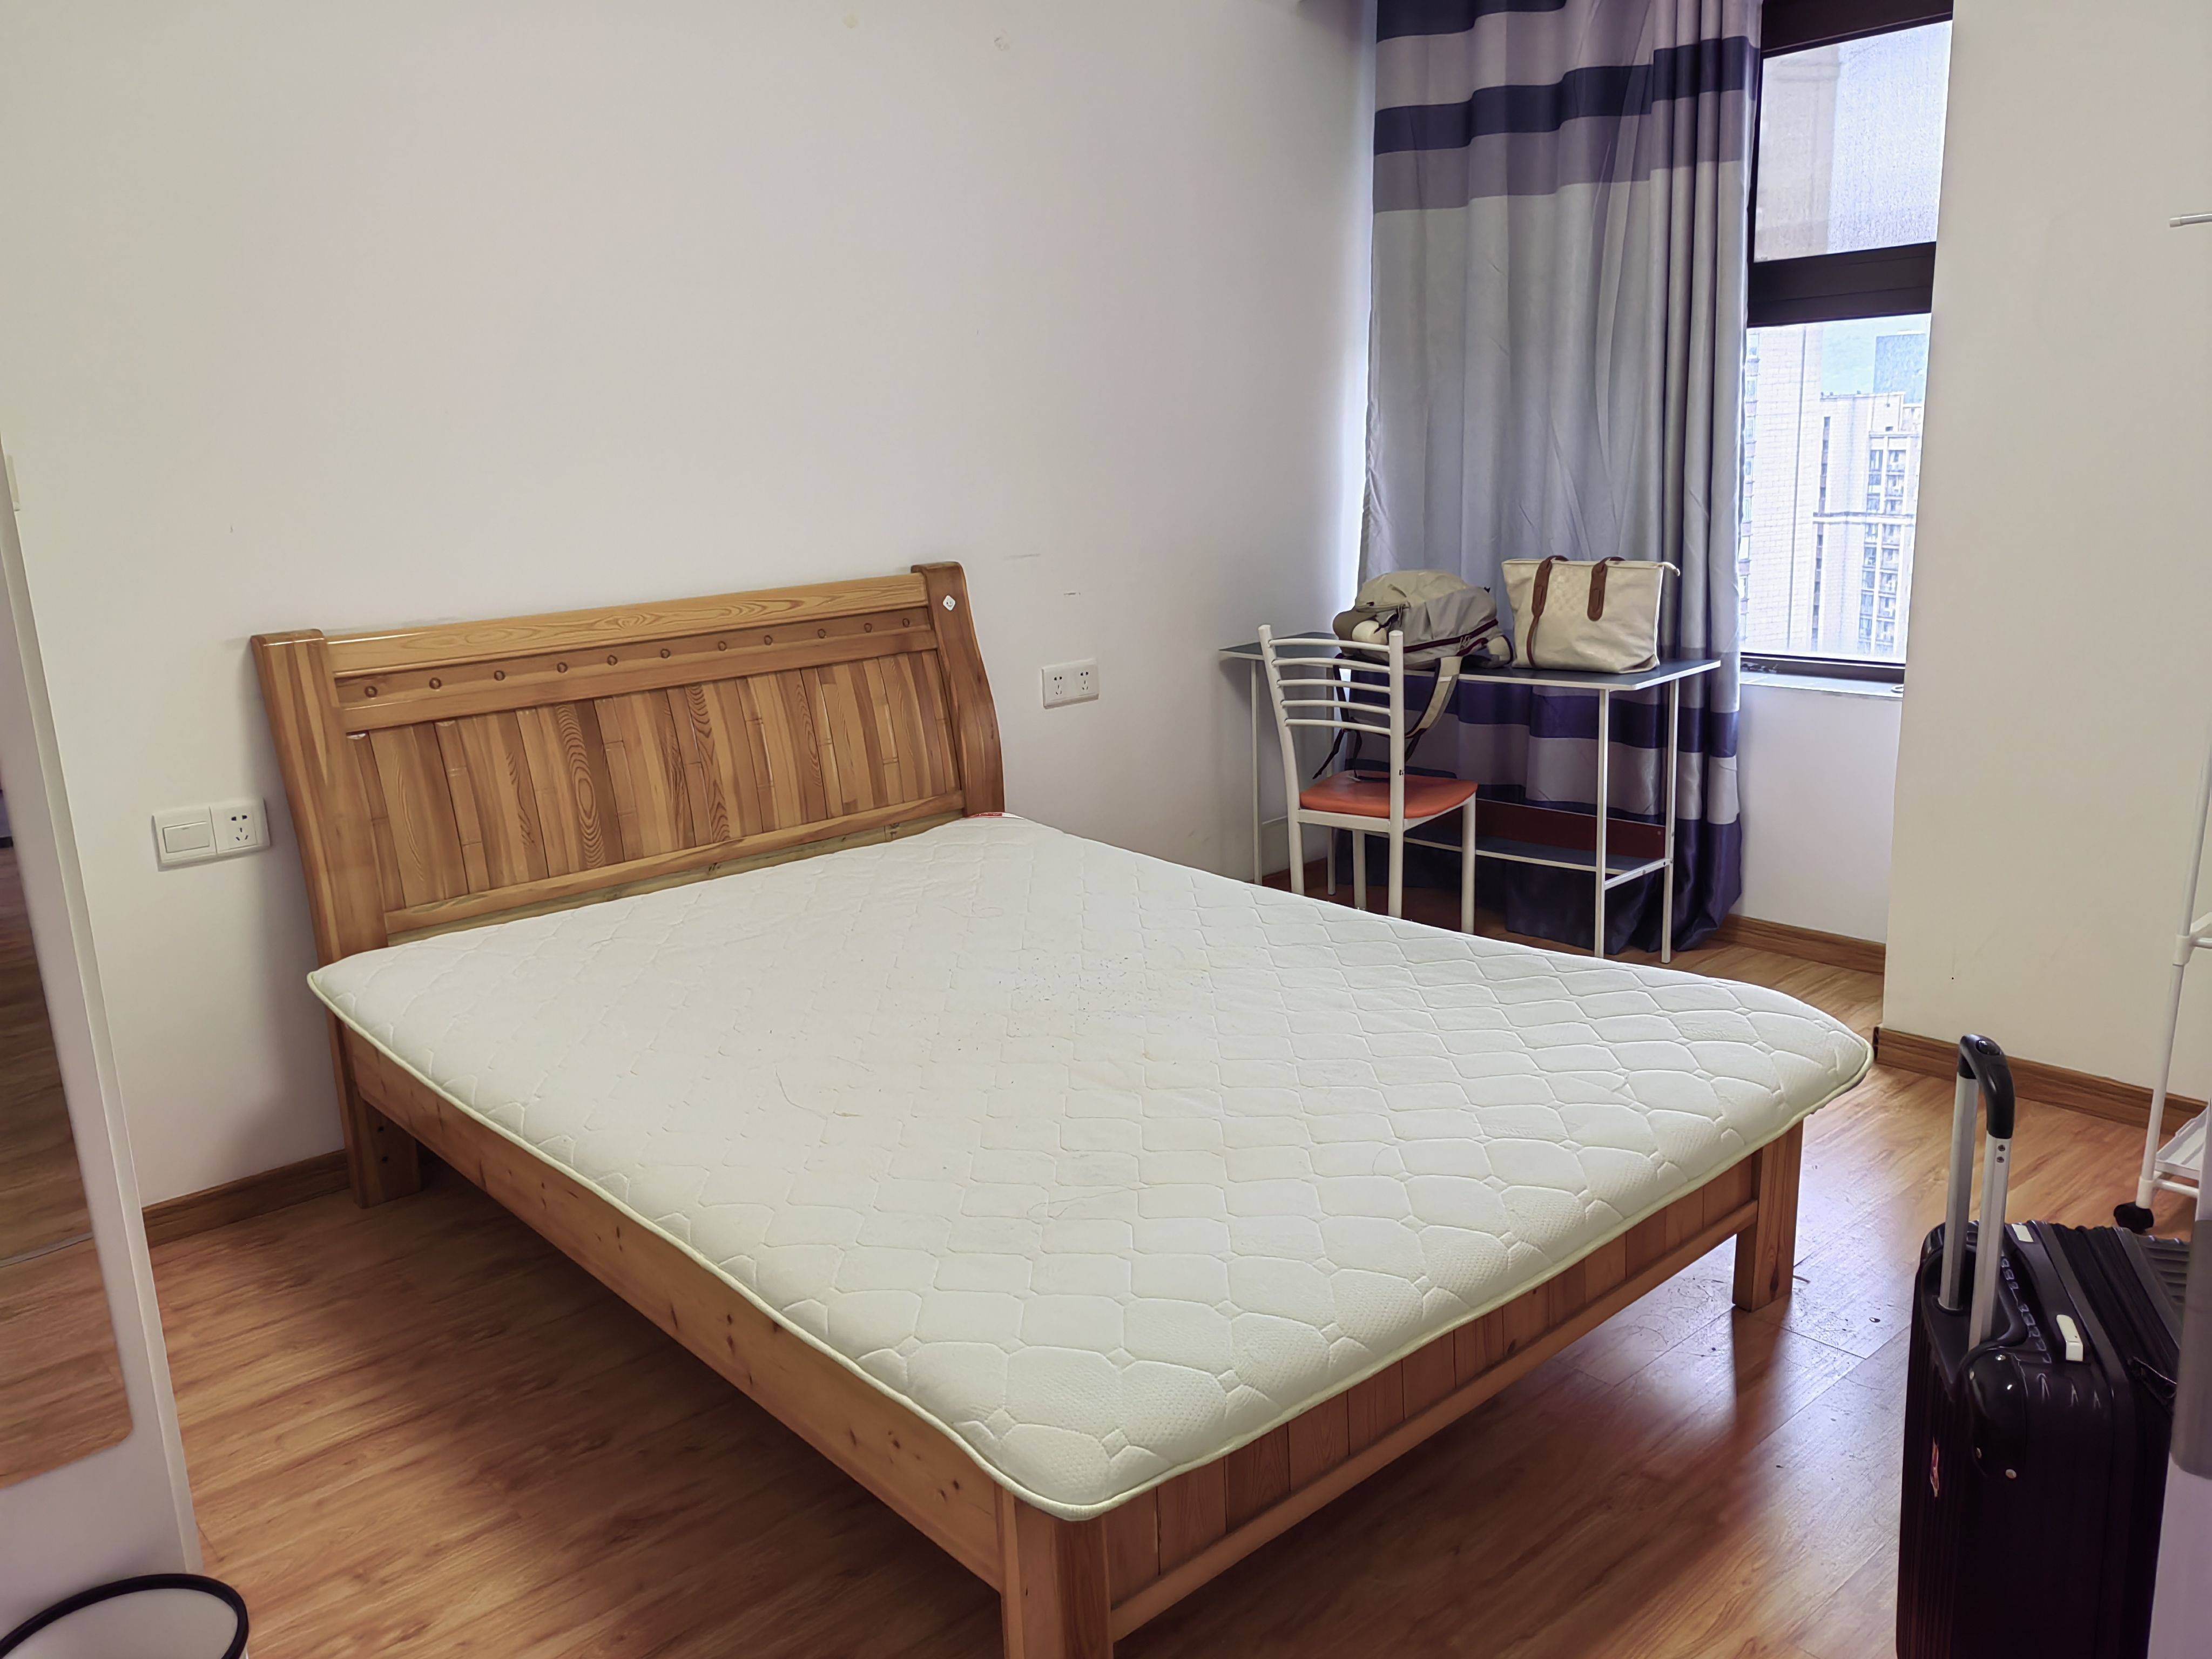 Nanjing-Jiangning-Cozy Home,Clean&Comfy,No Gender Limit,Hustle & Bustle,“Friends”,Chilled,LGBTQ Friendly,Pet Friendly